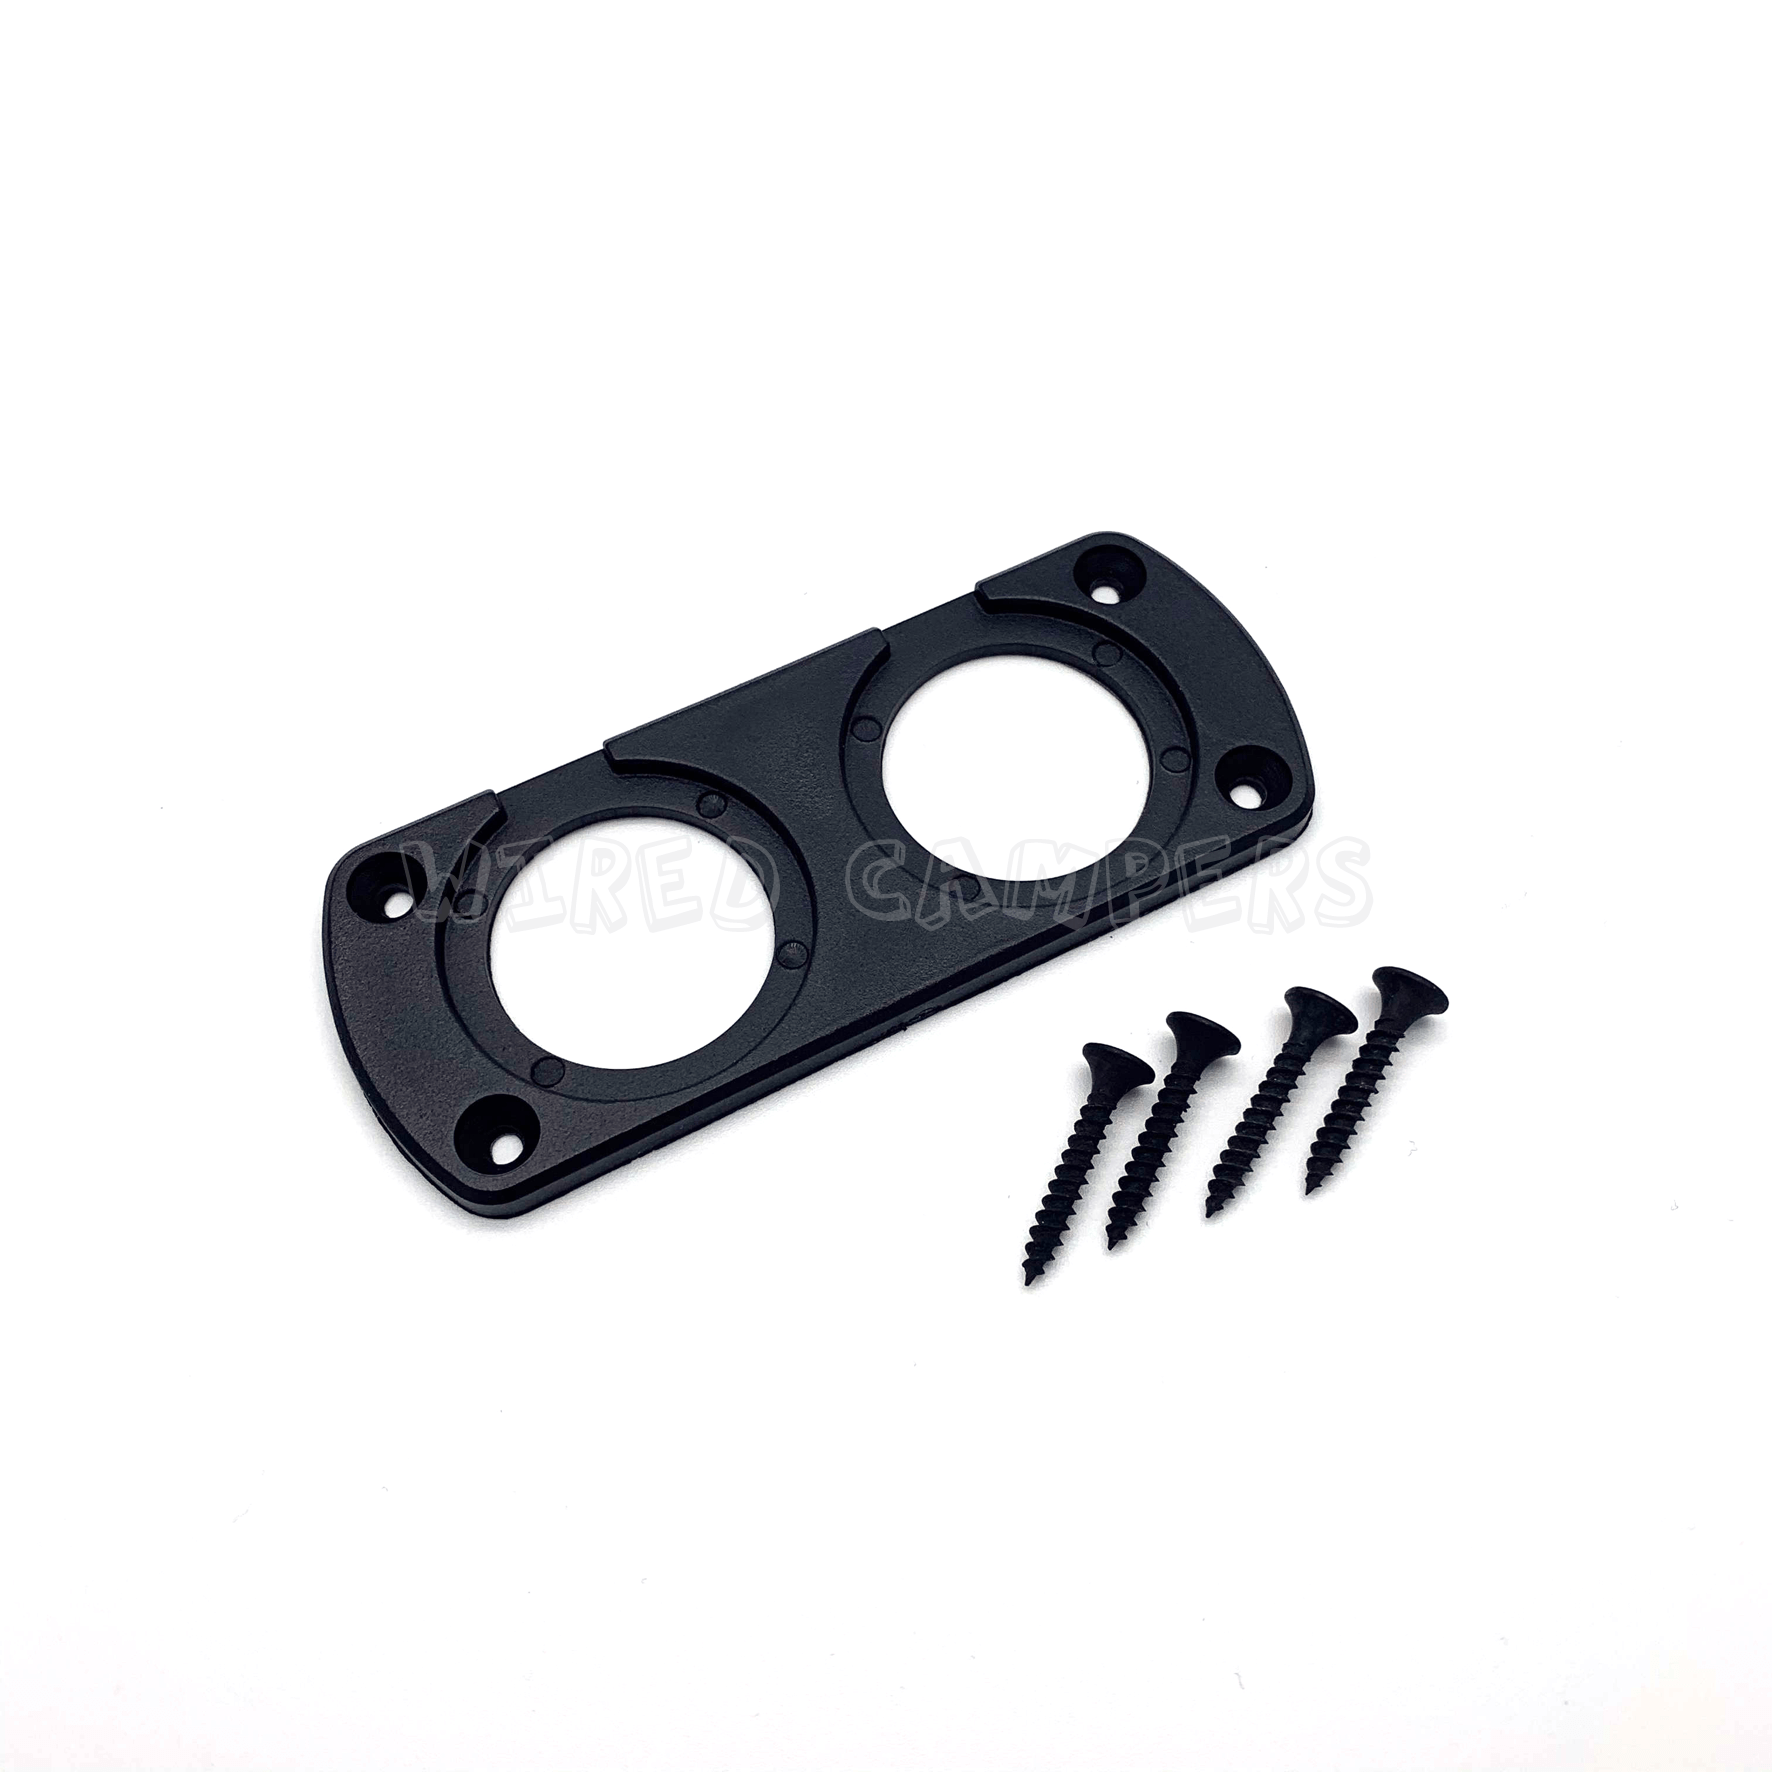 Wired Campers 12V Accessories Two 12V Accessory ABS Black Plastic One / Two Hole Mounting Plate